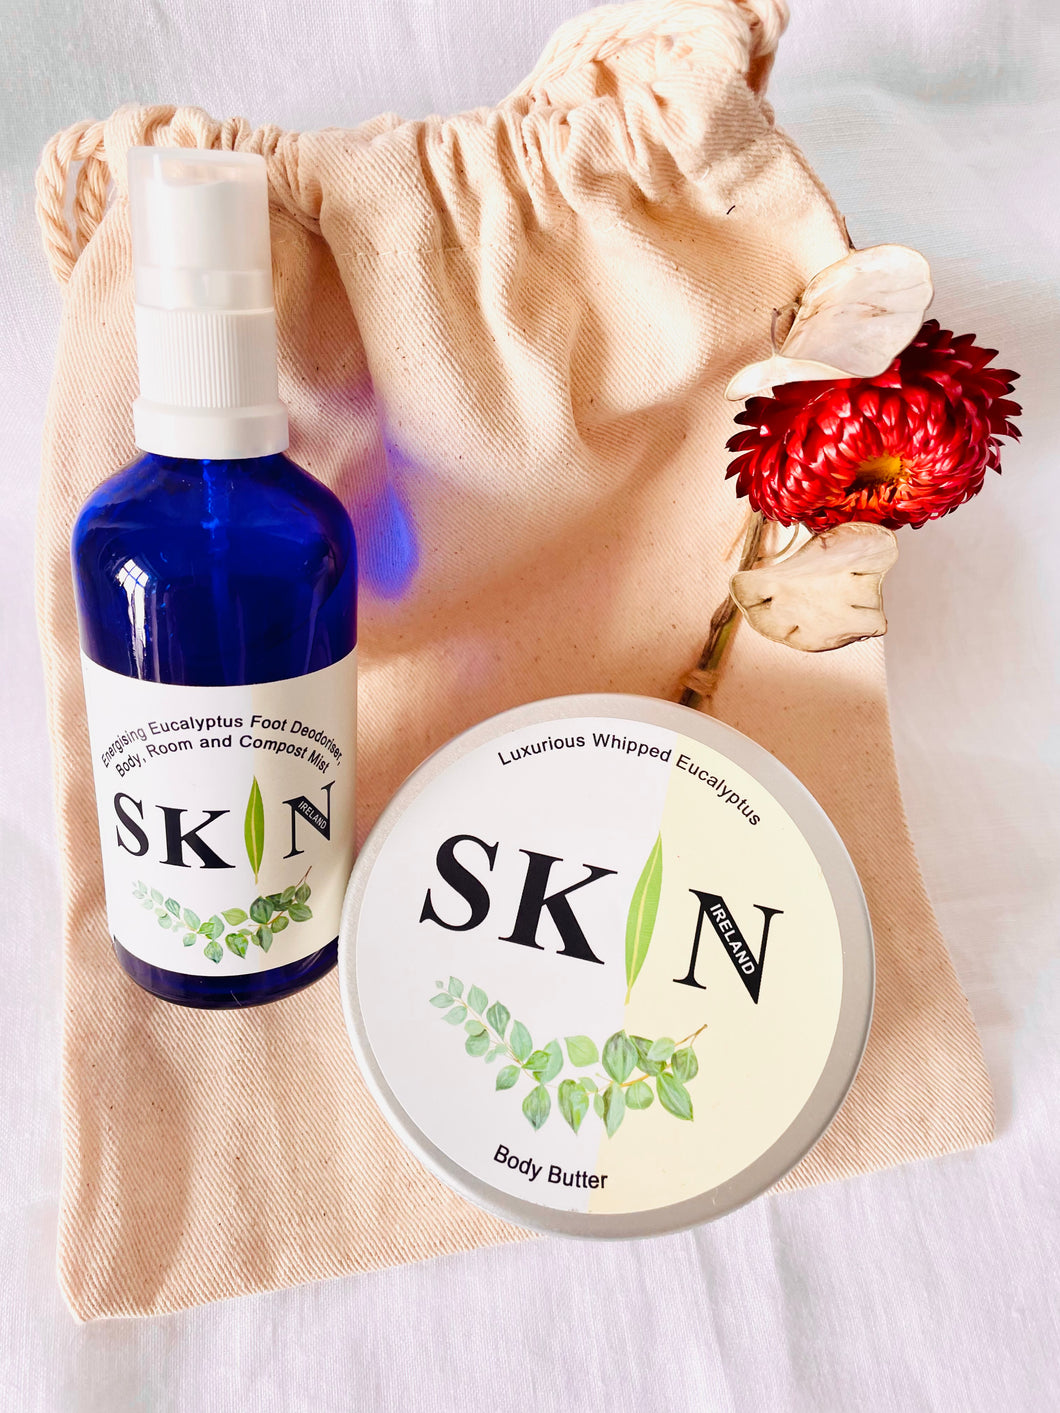 Gift Bag of Medium (100m) Luxurious Eucalyptus Body Butter and Energising Eucalyptus Body and Room Mist. Gift bag features Irish grown and naturally dried flower, hand-sewn onto linen bag.  Ready to gift - no wrapping necessary!